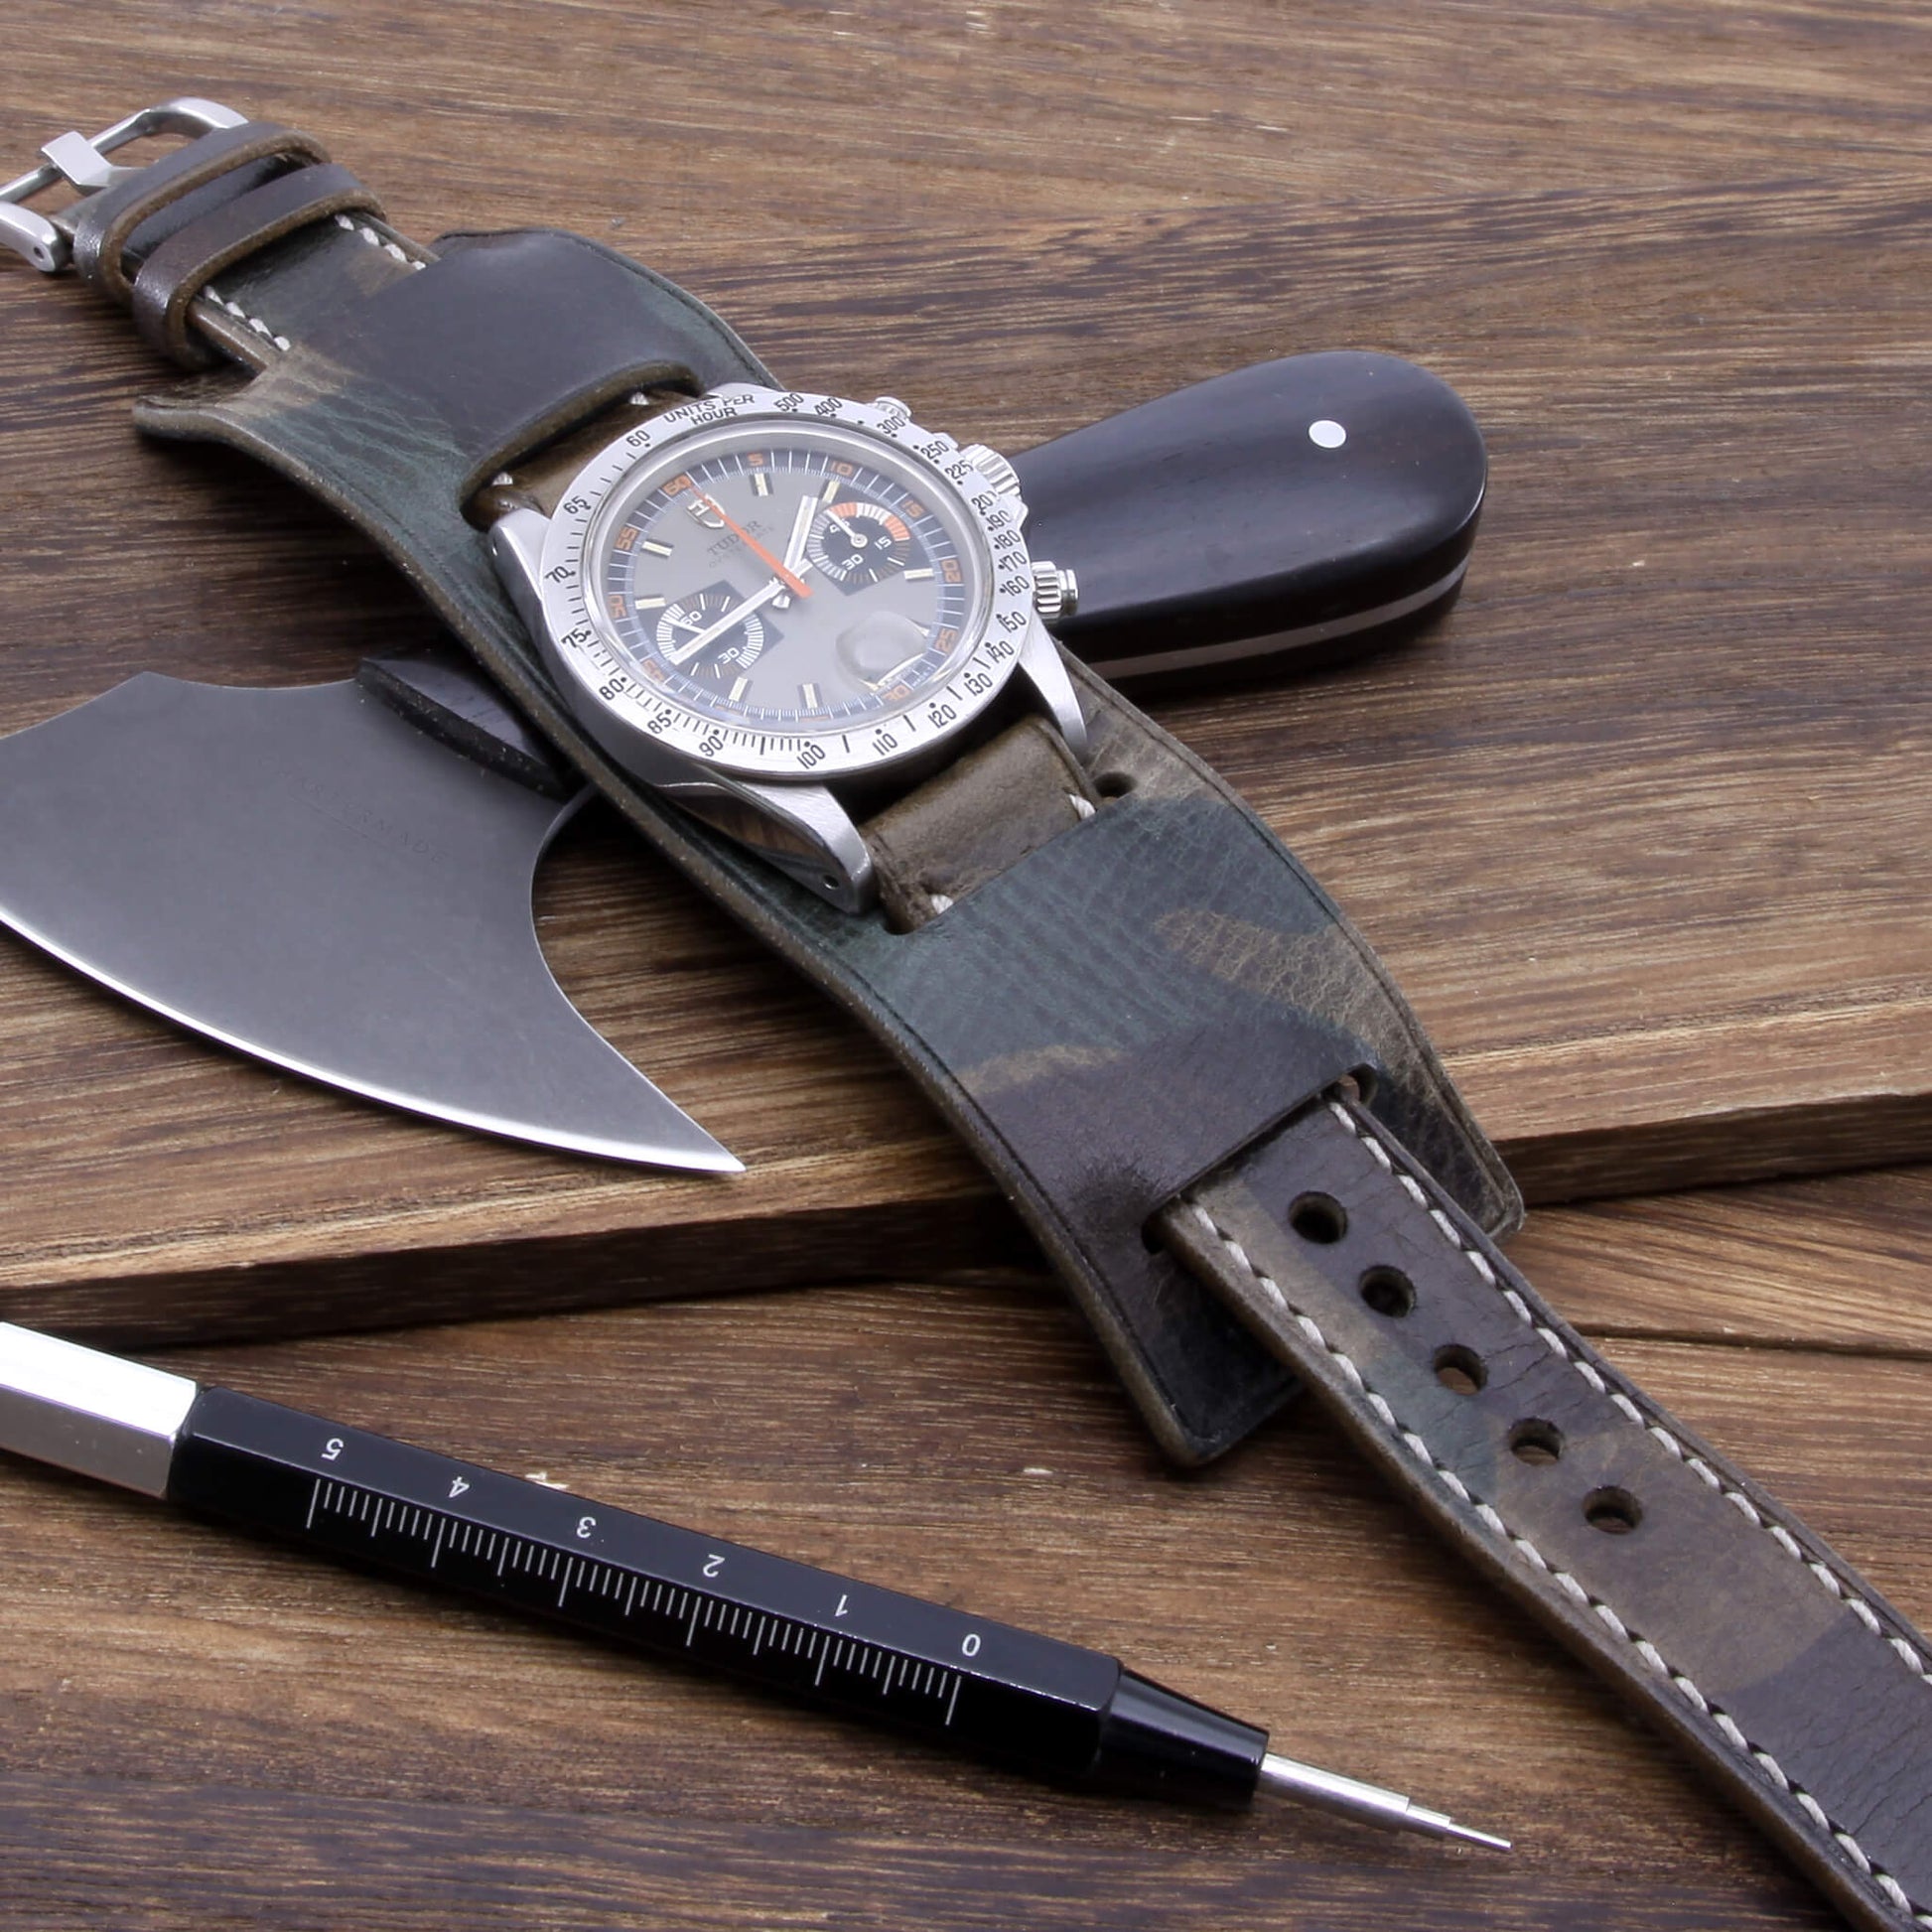 Leather bund pad in Newman Style Military 107 camouflage (timepiece for illustrative purposes only) | Stitch-less construction, made with full grain Italian veg-tanned leather